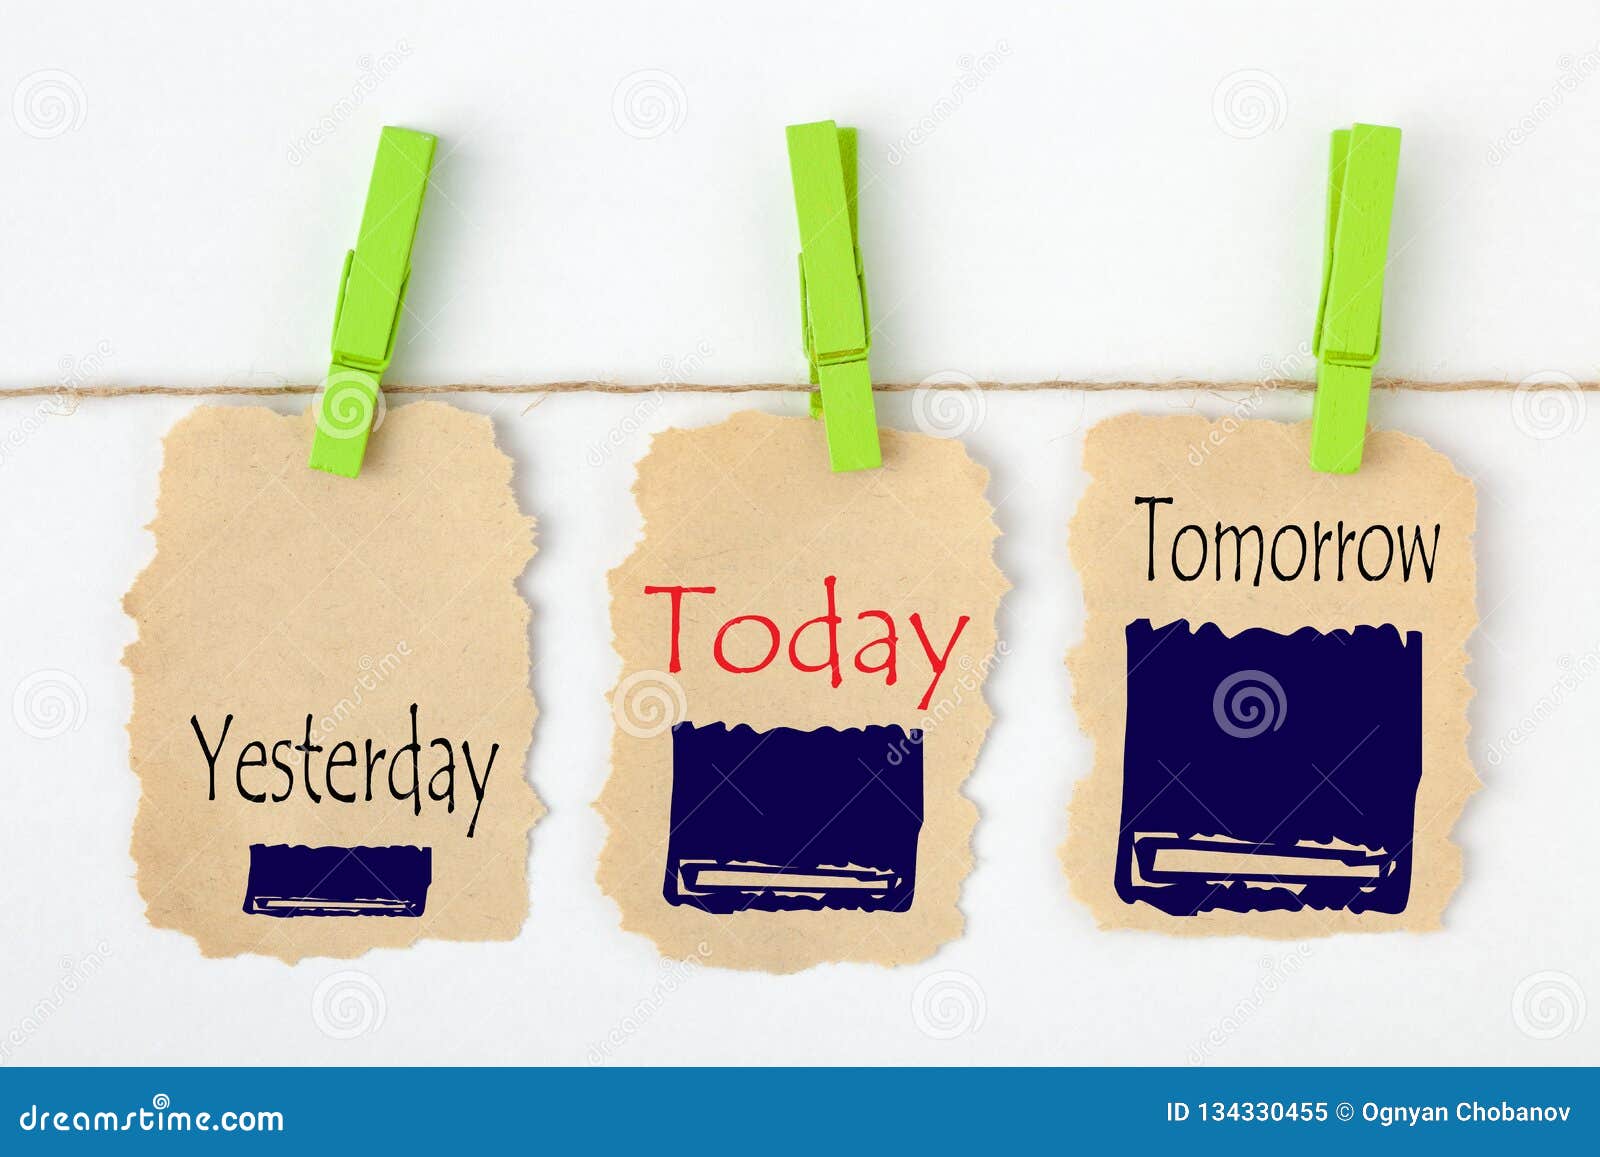 Today, Yesterday, and Tomorrow